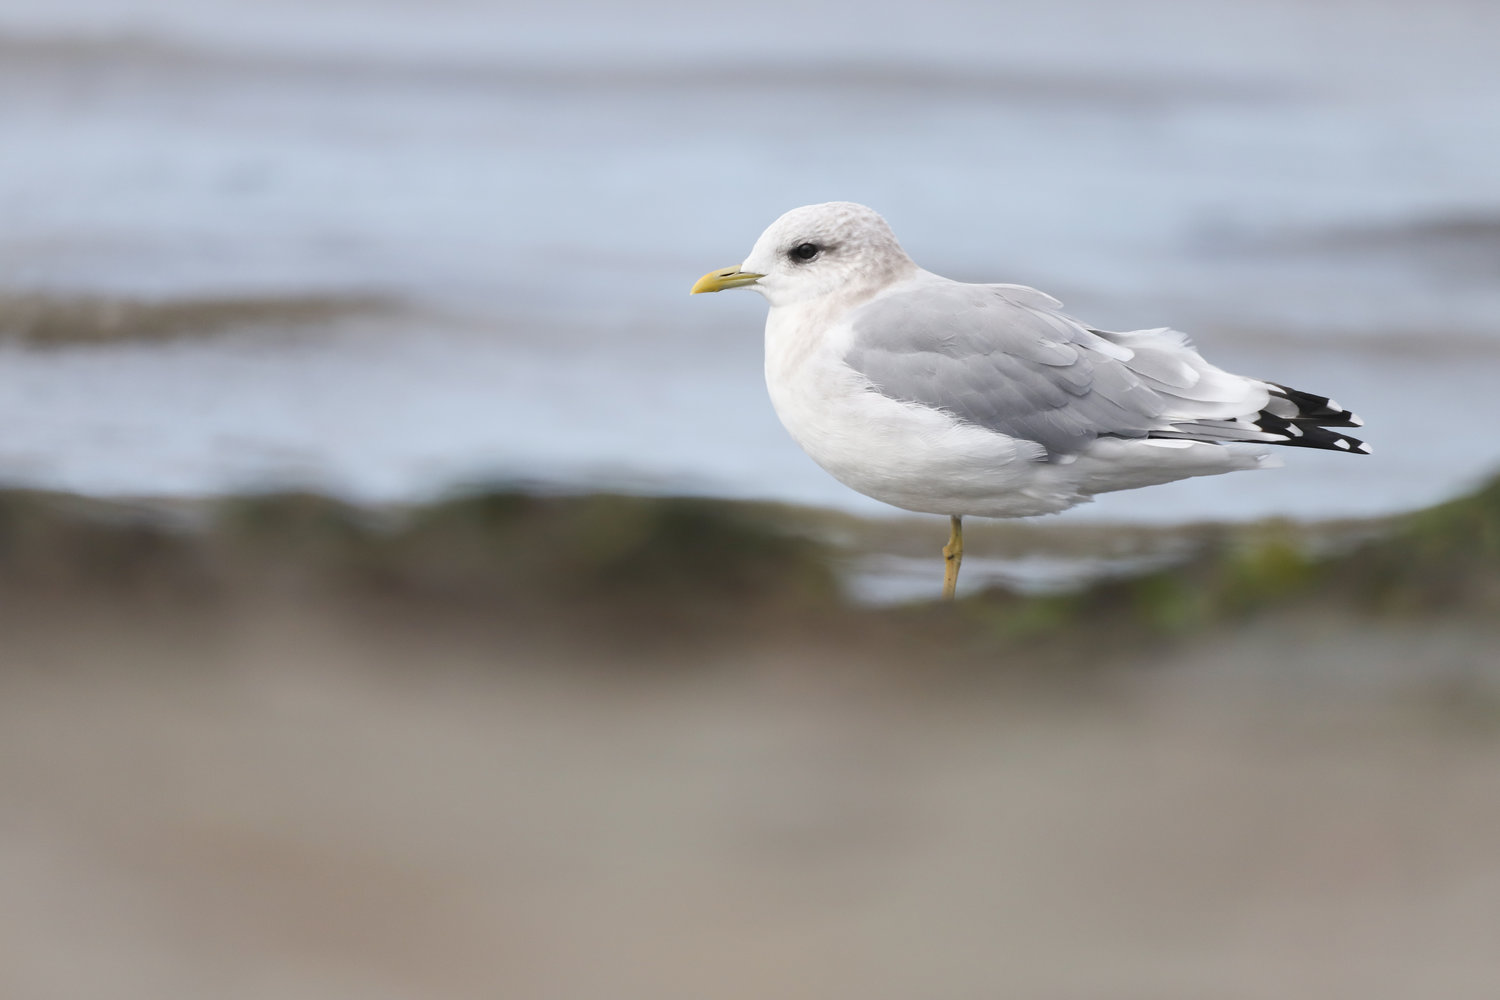 This is the Short-billed Gull, showing its smaller and finer bill.